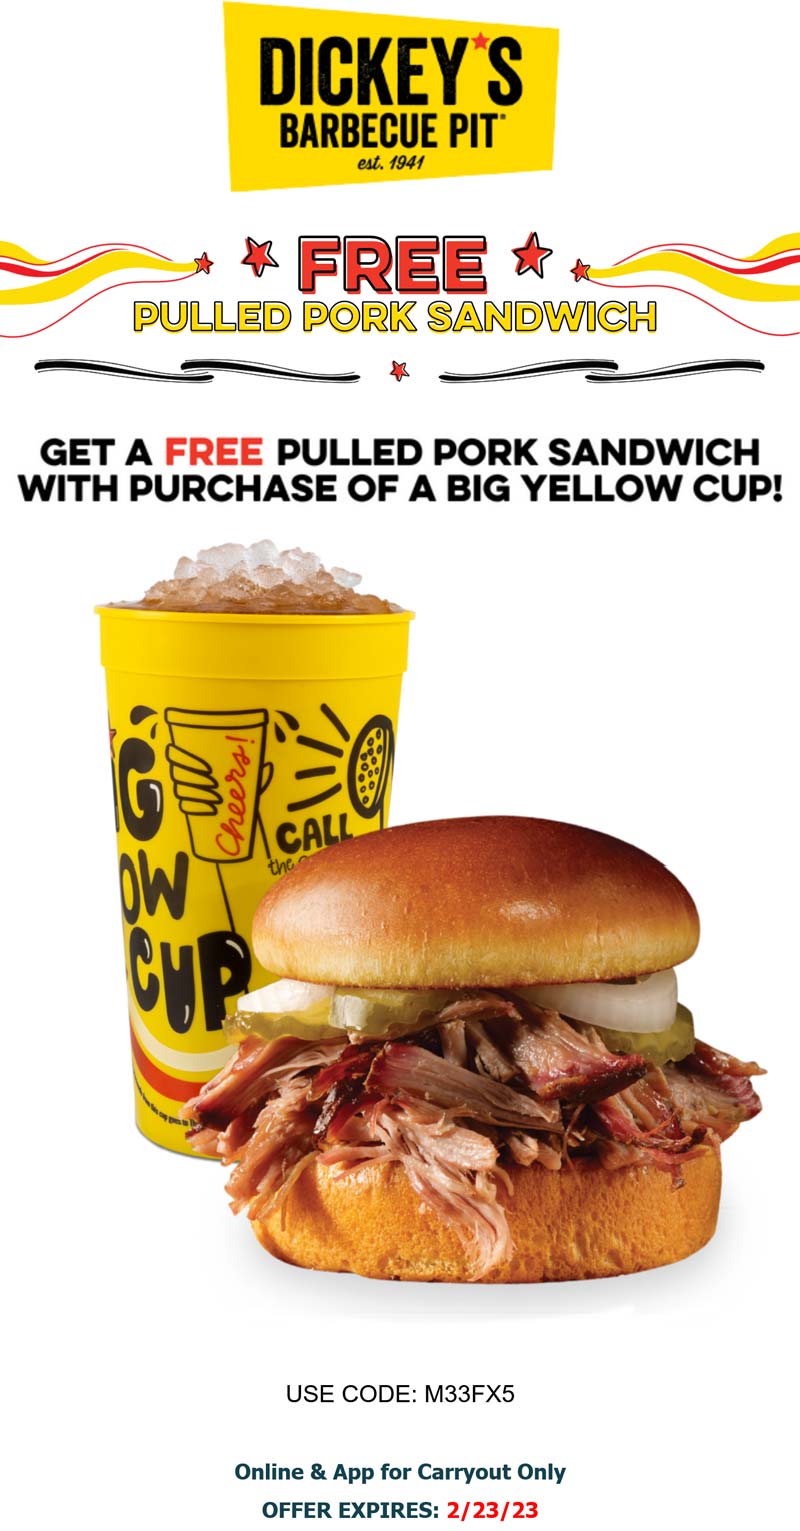 Dickeys Barbecue Pit restaurants Coupon  Free pulled pork sandwich with your drink at Dickeys Barbecue Pit via promo code M33FX5 #dickeysbarbecuepit 